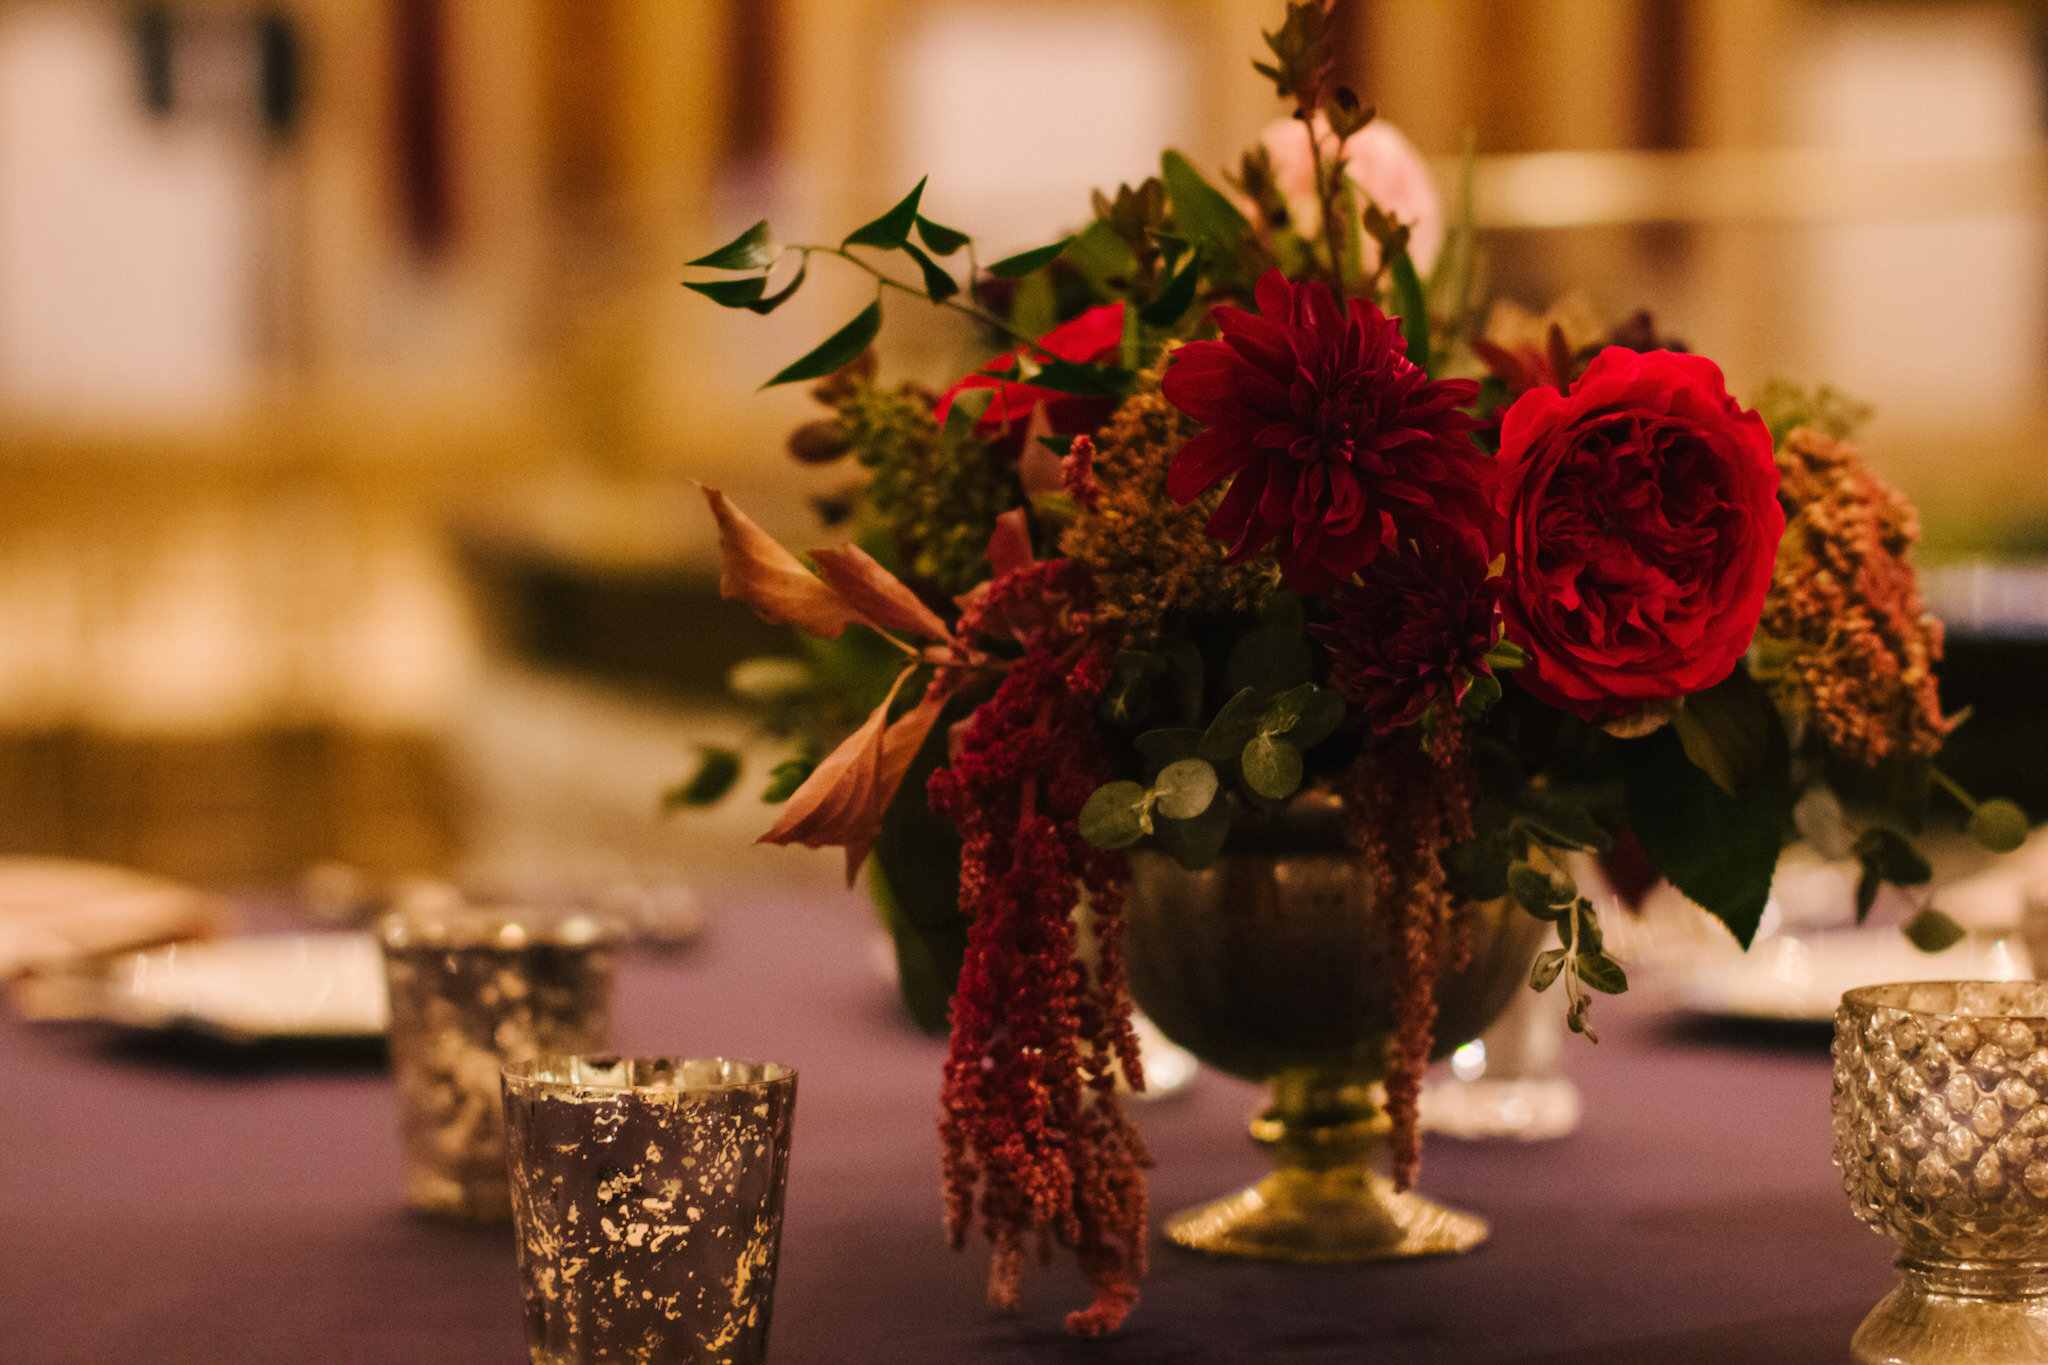 Red Wedding Centerpieces: Elegant Jewel-Toned Wedding captured by Dorey Kronick featured on CHI thee WED